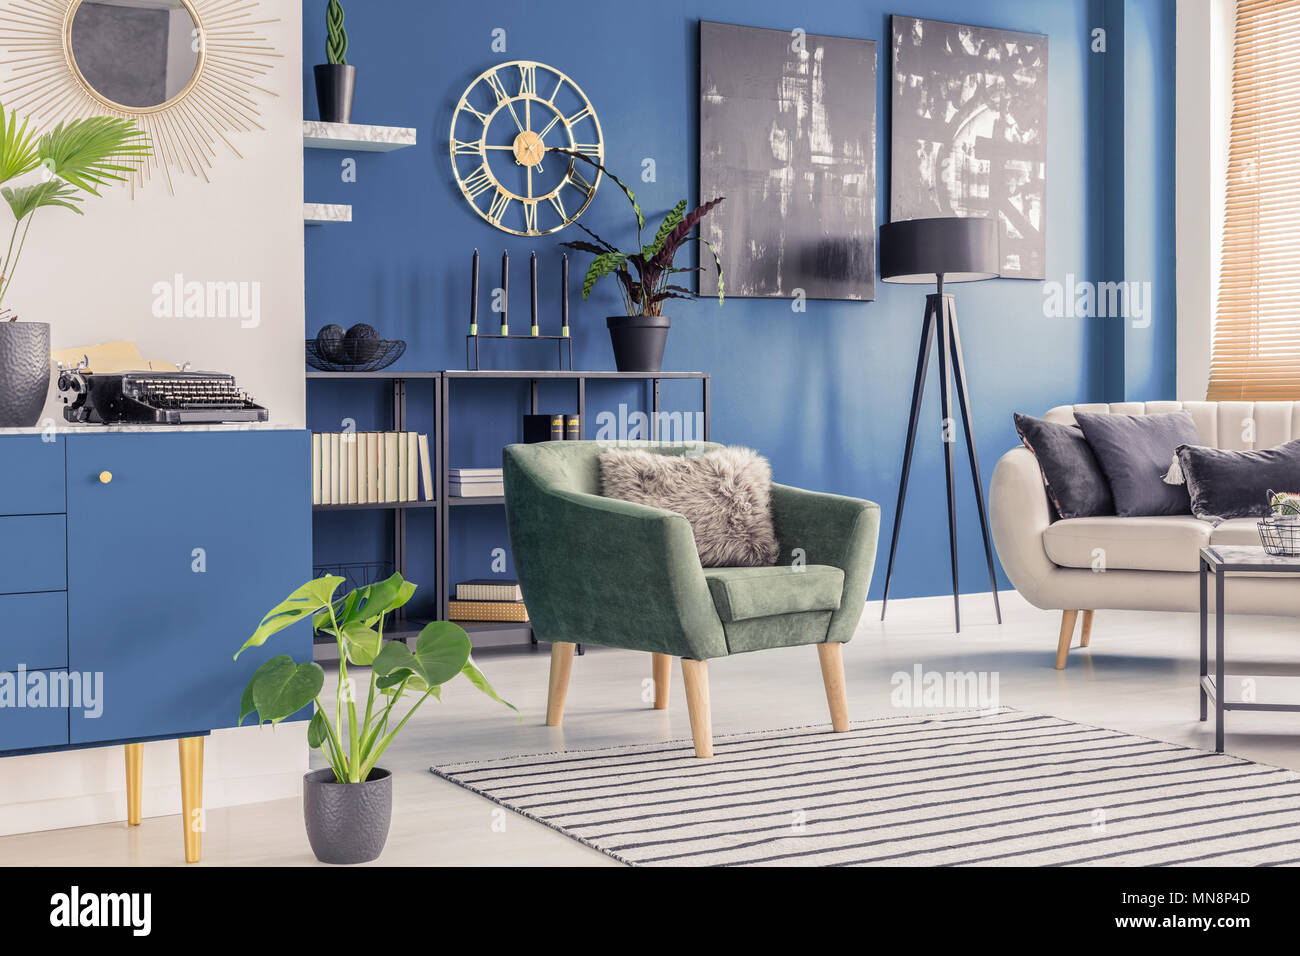 Retro typewriter and golden wall clock in a blue living room interior with paintings and modern furniture Stock Photo